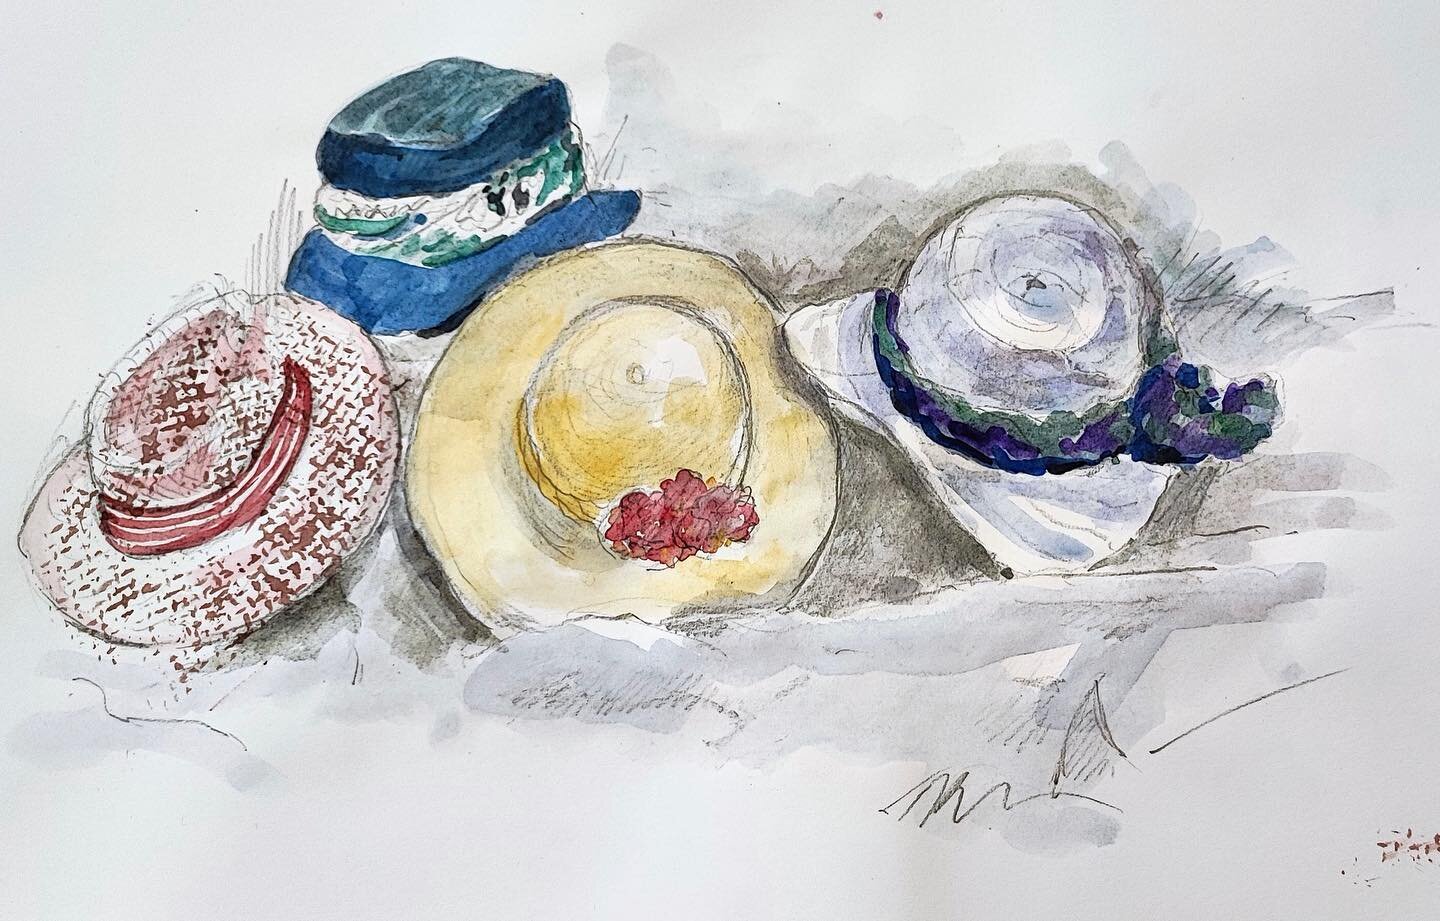 13th June. Summer Hats Event.
The group held a still-life/portrait drawing event. Members brought along a summer hat and the group drew both the hats and other members wearing them.  Some speedy watercolour work, some pastel and a delightful expressi